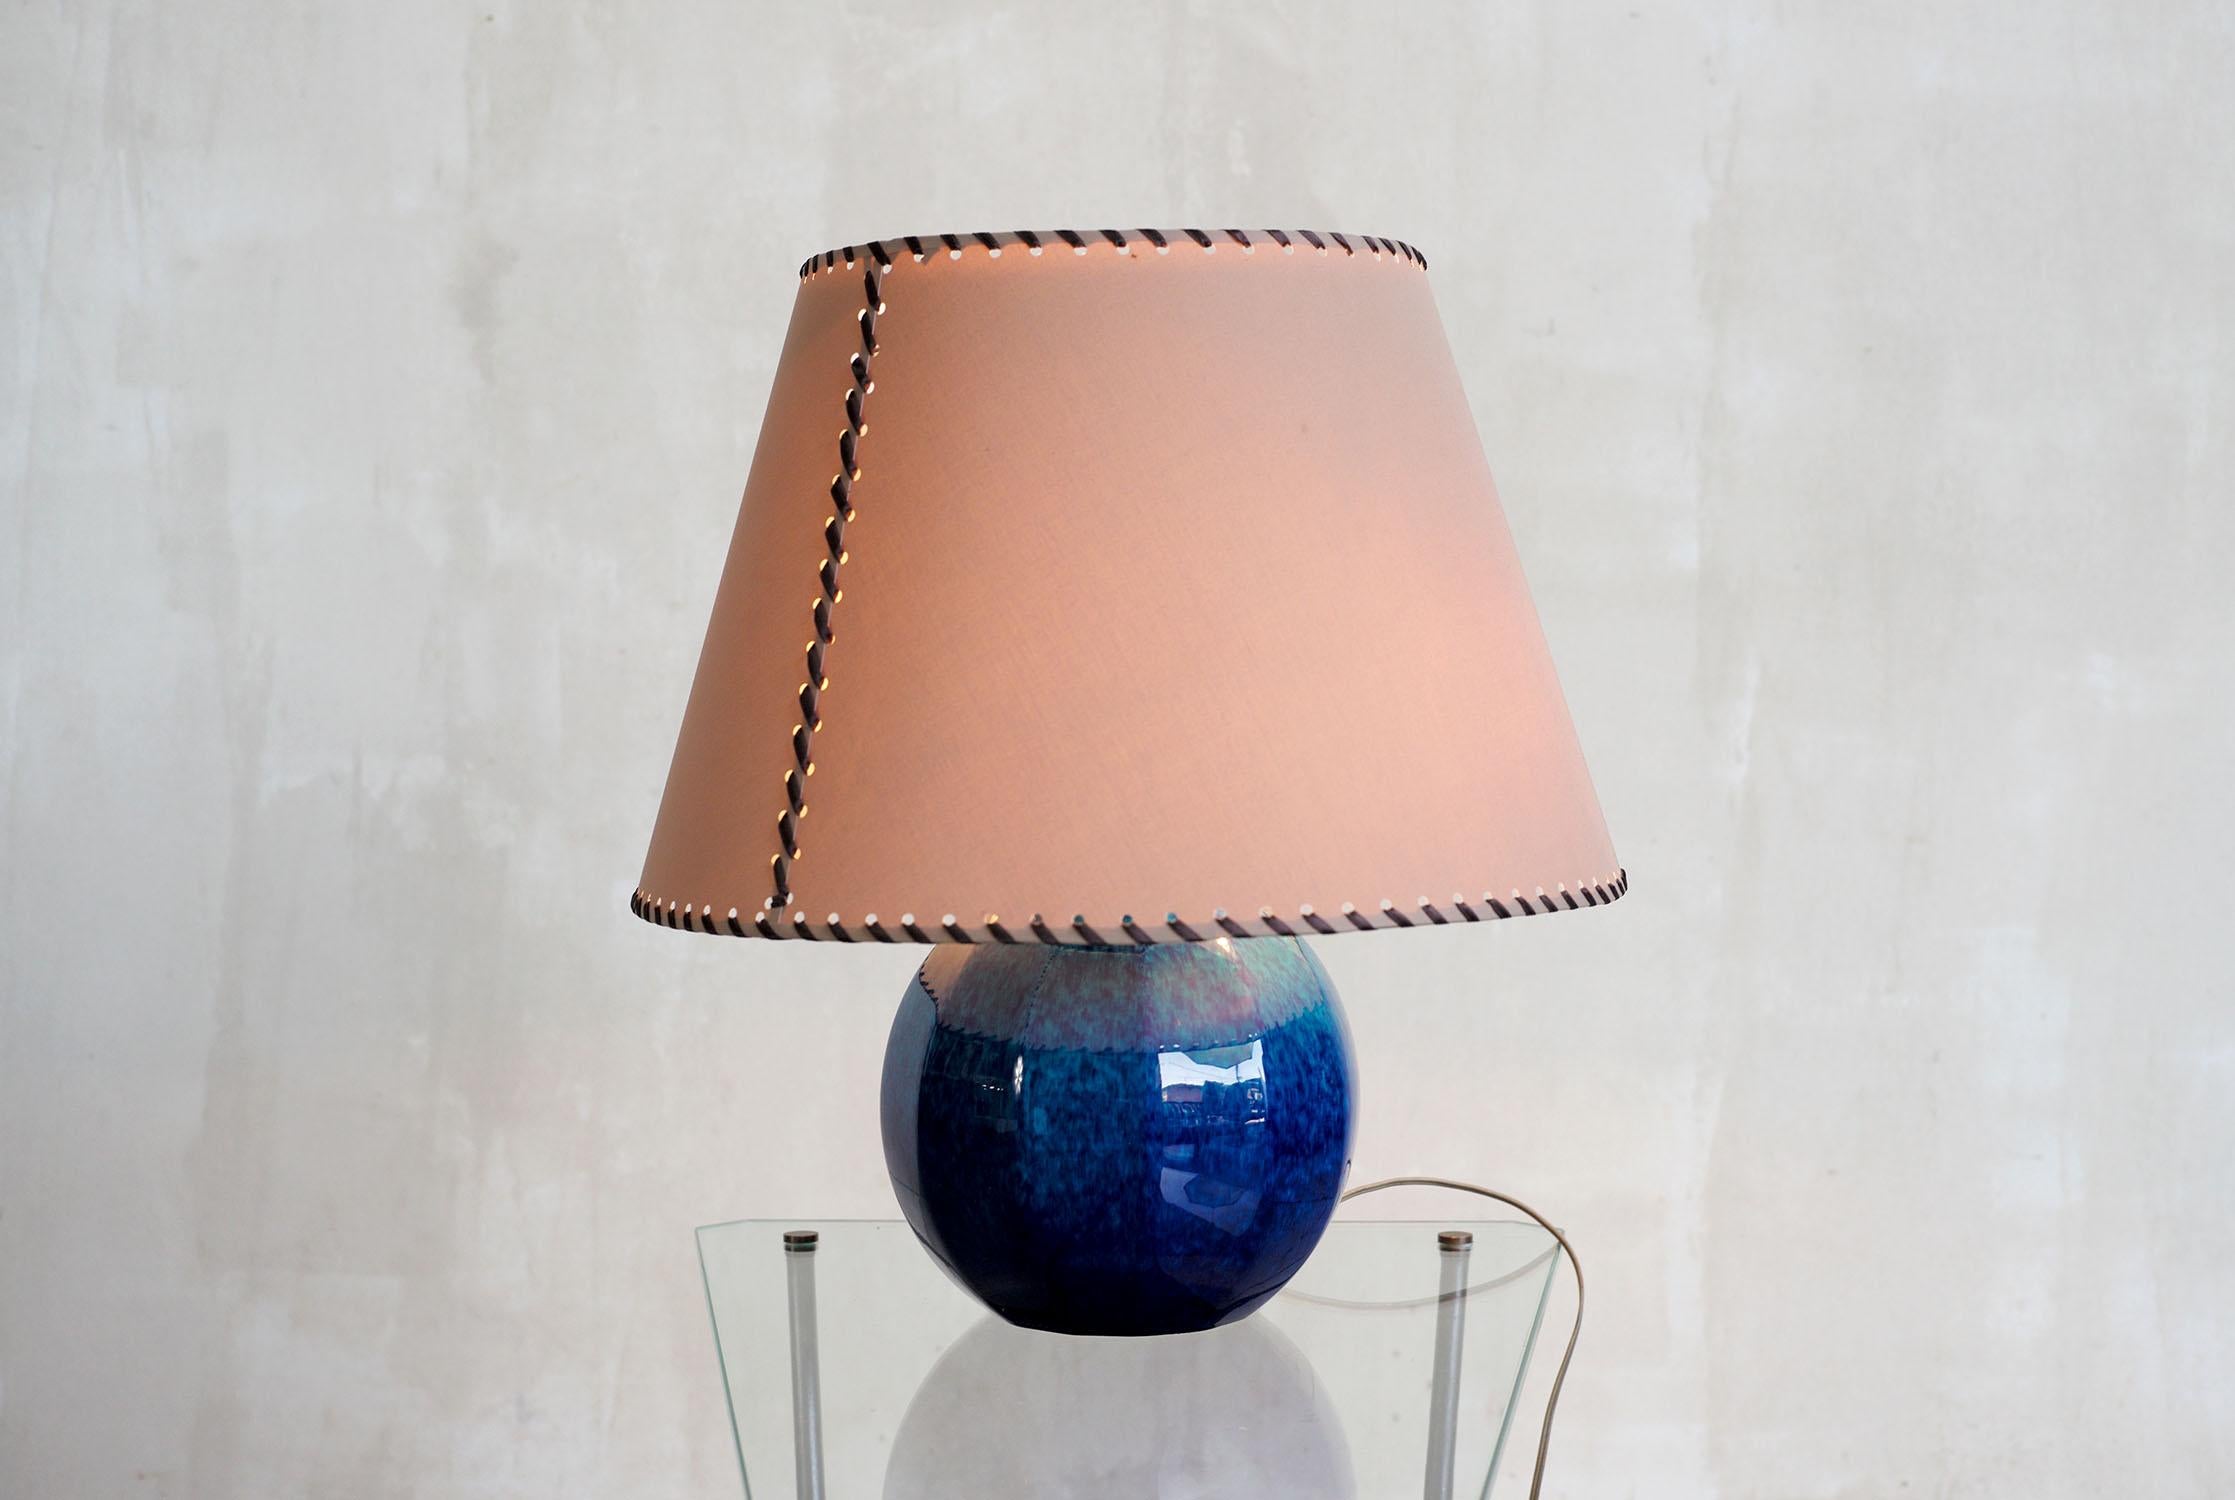 Speckled blue ceramic living room lamp by Paul Milet, Sèvres 1930. The laced fabric lampshade rests on the upper reflector, the three lights are independent, controlled by socket switches.
Dimensions of lamp base alone: D 25/H 49 cm
Signed under